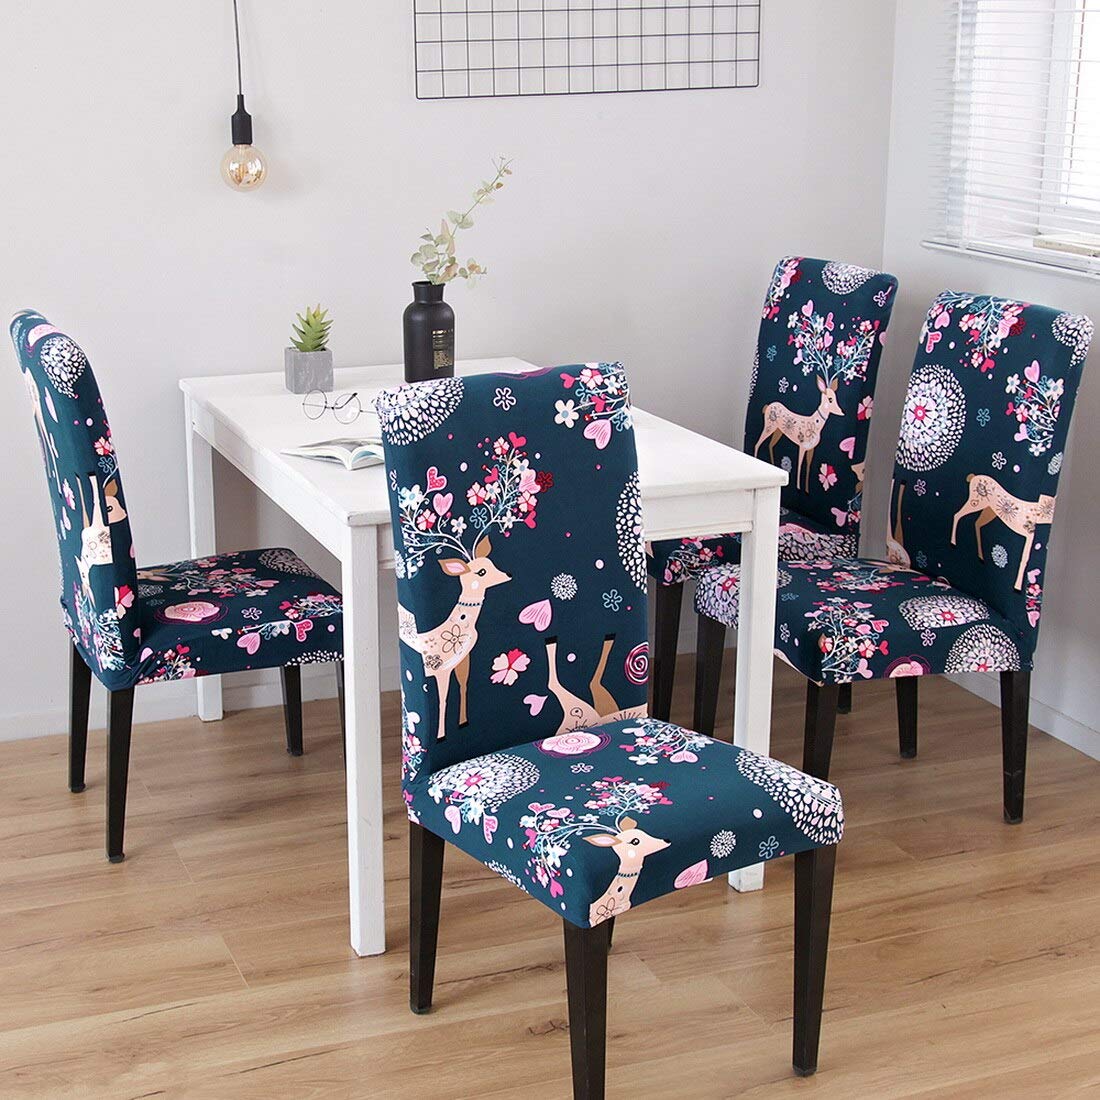 Premium Chair Cover - Stretchable & Elastic Fitted Great Happy IN Blue Deer 2 PCS - ₹799 